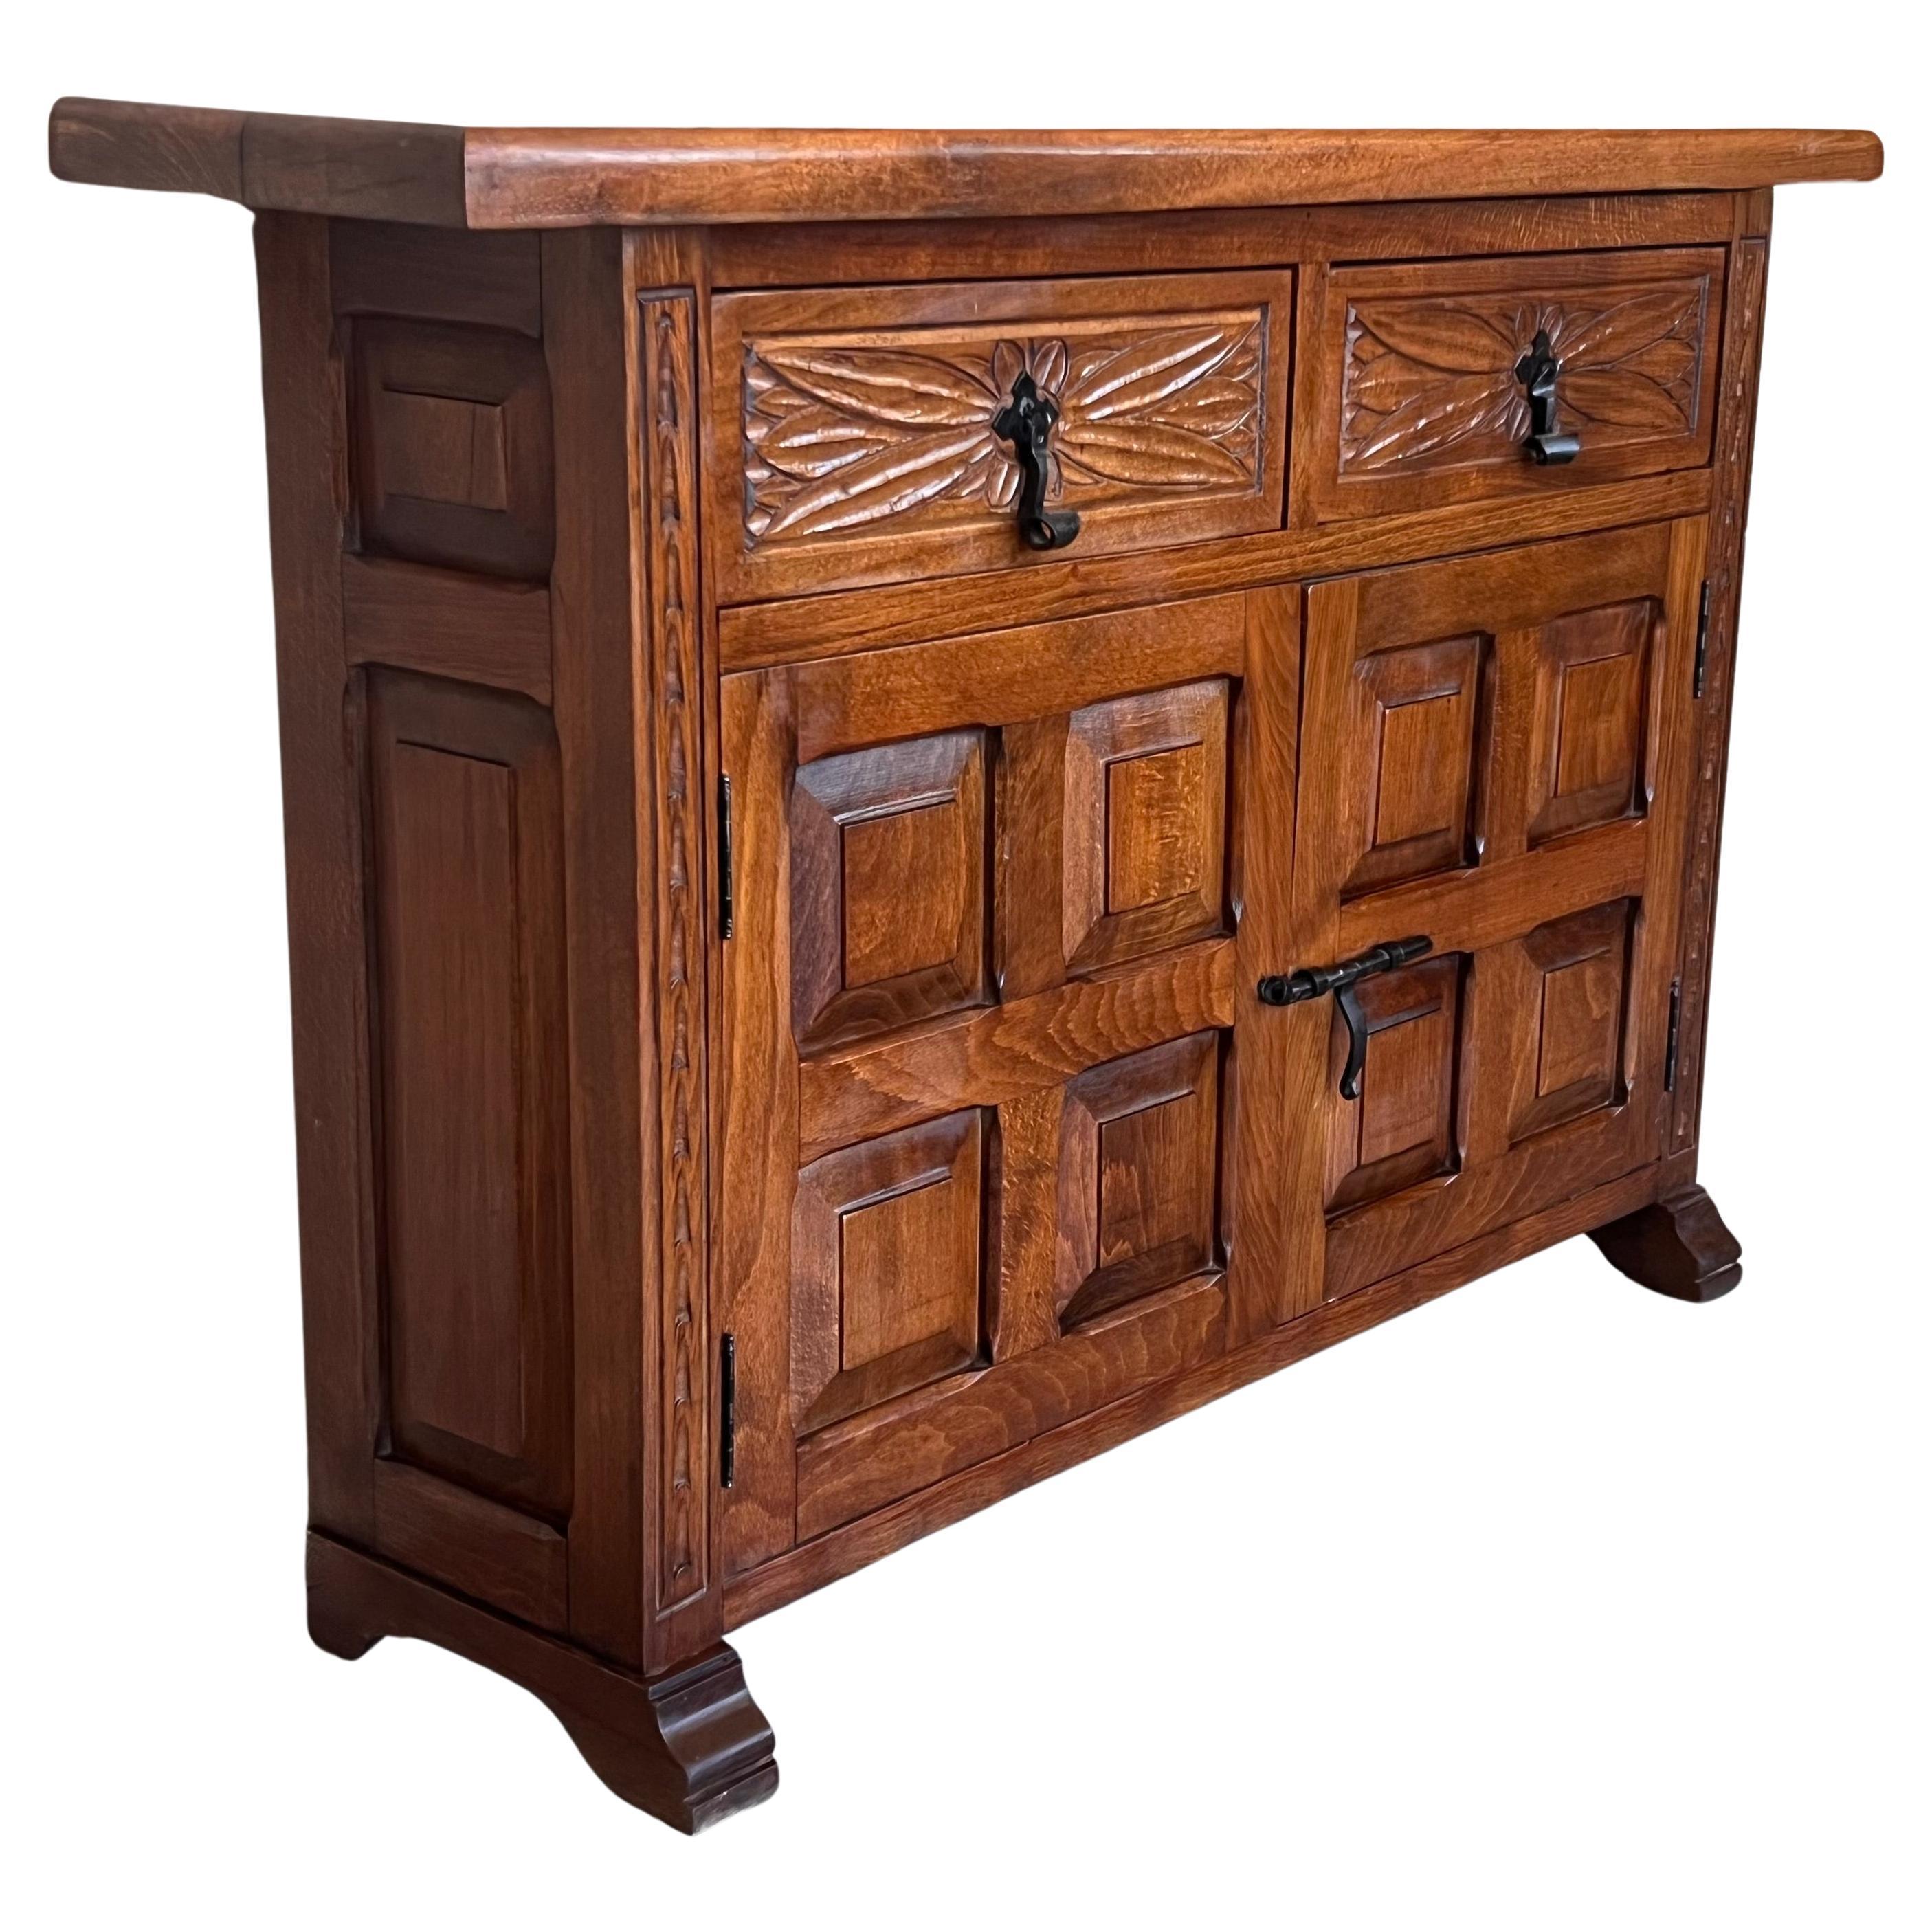 19th Spanish Narrow Baroque Carved Walnut Tuscan Two Drawer Credenza or Buffet For Sale